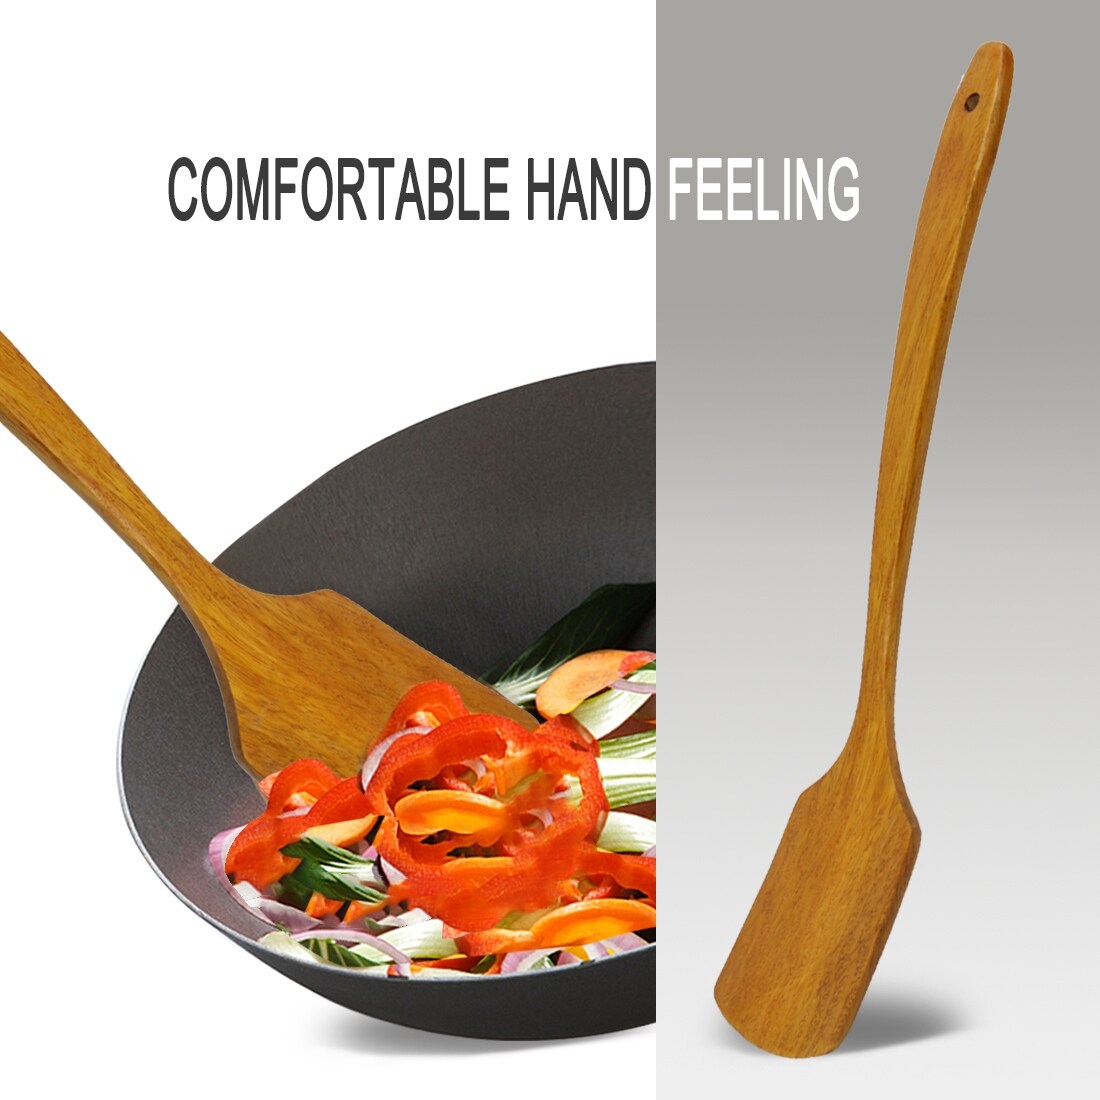 https://ak1.ostkcdn.com/images/products/is/images/direct/b78ff4214a4d6d9896383f5c3eb6b9a0655794bc/Wooden-Turner-Stir-Frying-Wok-Spatula-Kitchen-Pan-Cooking-Baking-Brown.jpg